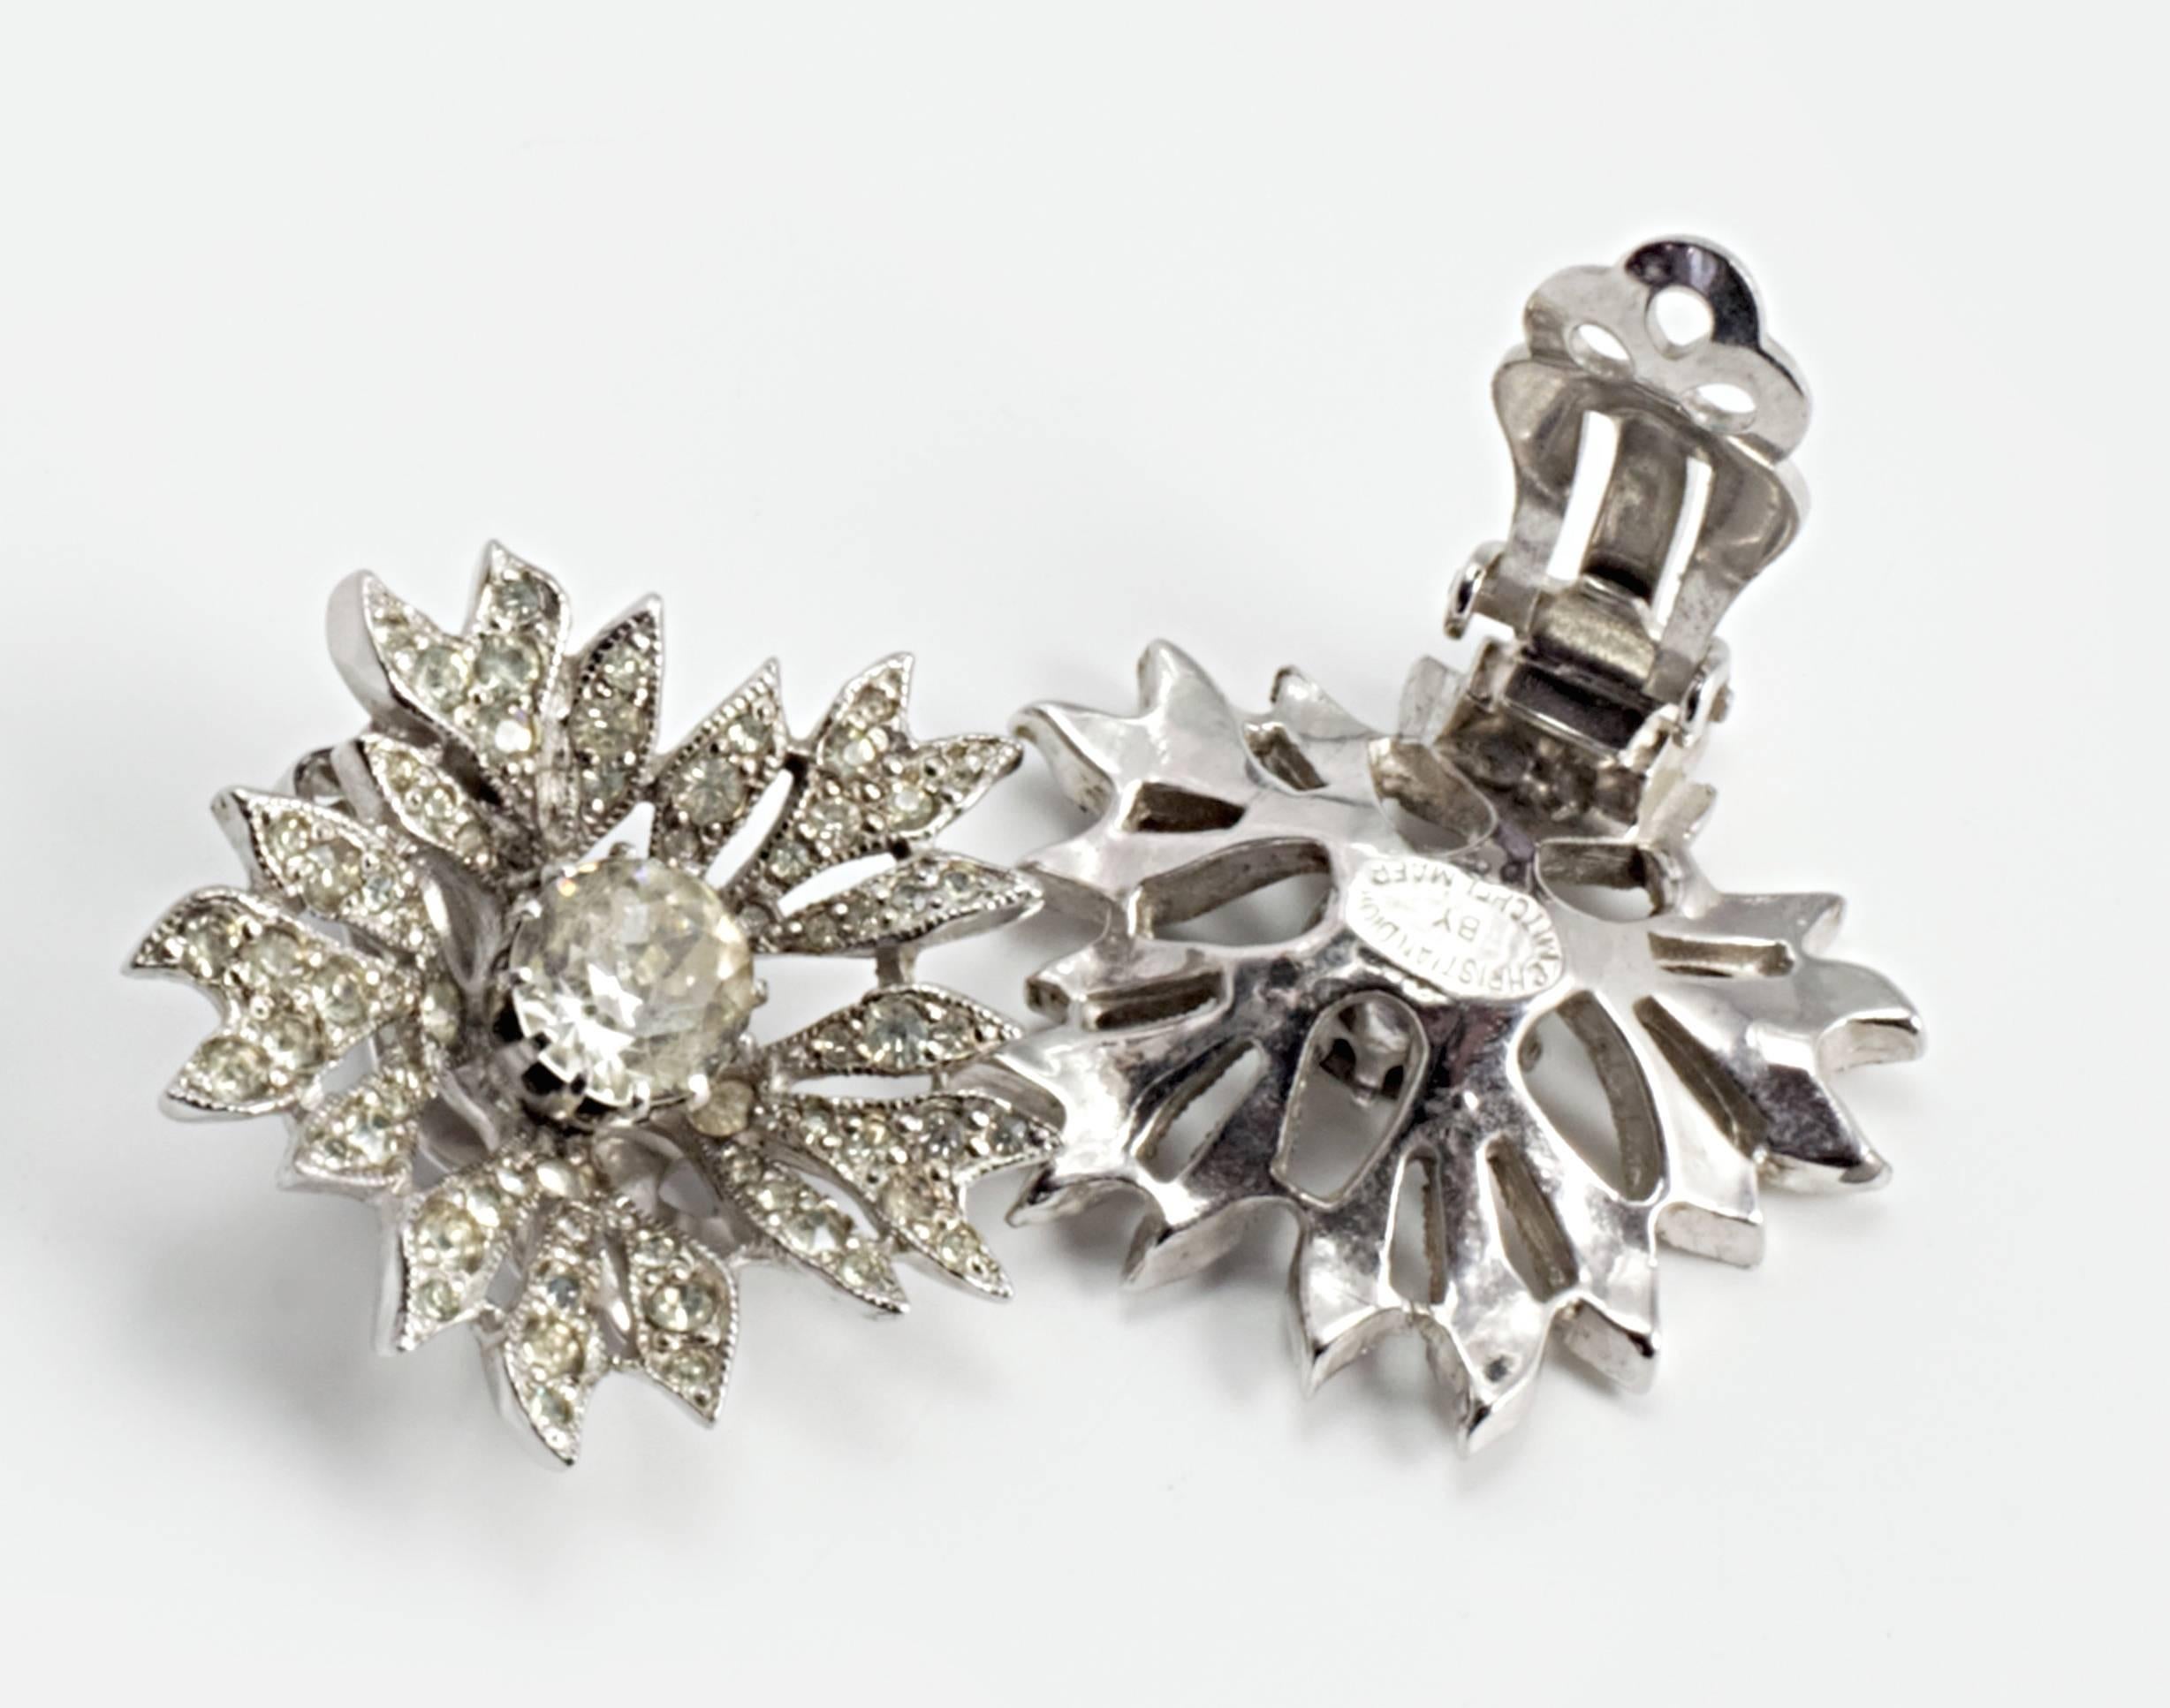 Stunning and sought after 1950's Dior earrings in the shape of open flowers, Rhodium plated and set with crystal rhinestones.

Mitchel Maer is the most collectable name in jewellery from the house of Dior. During his time designing for Dior, he